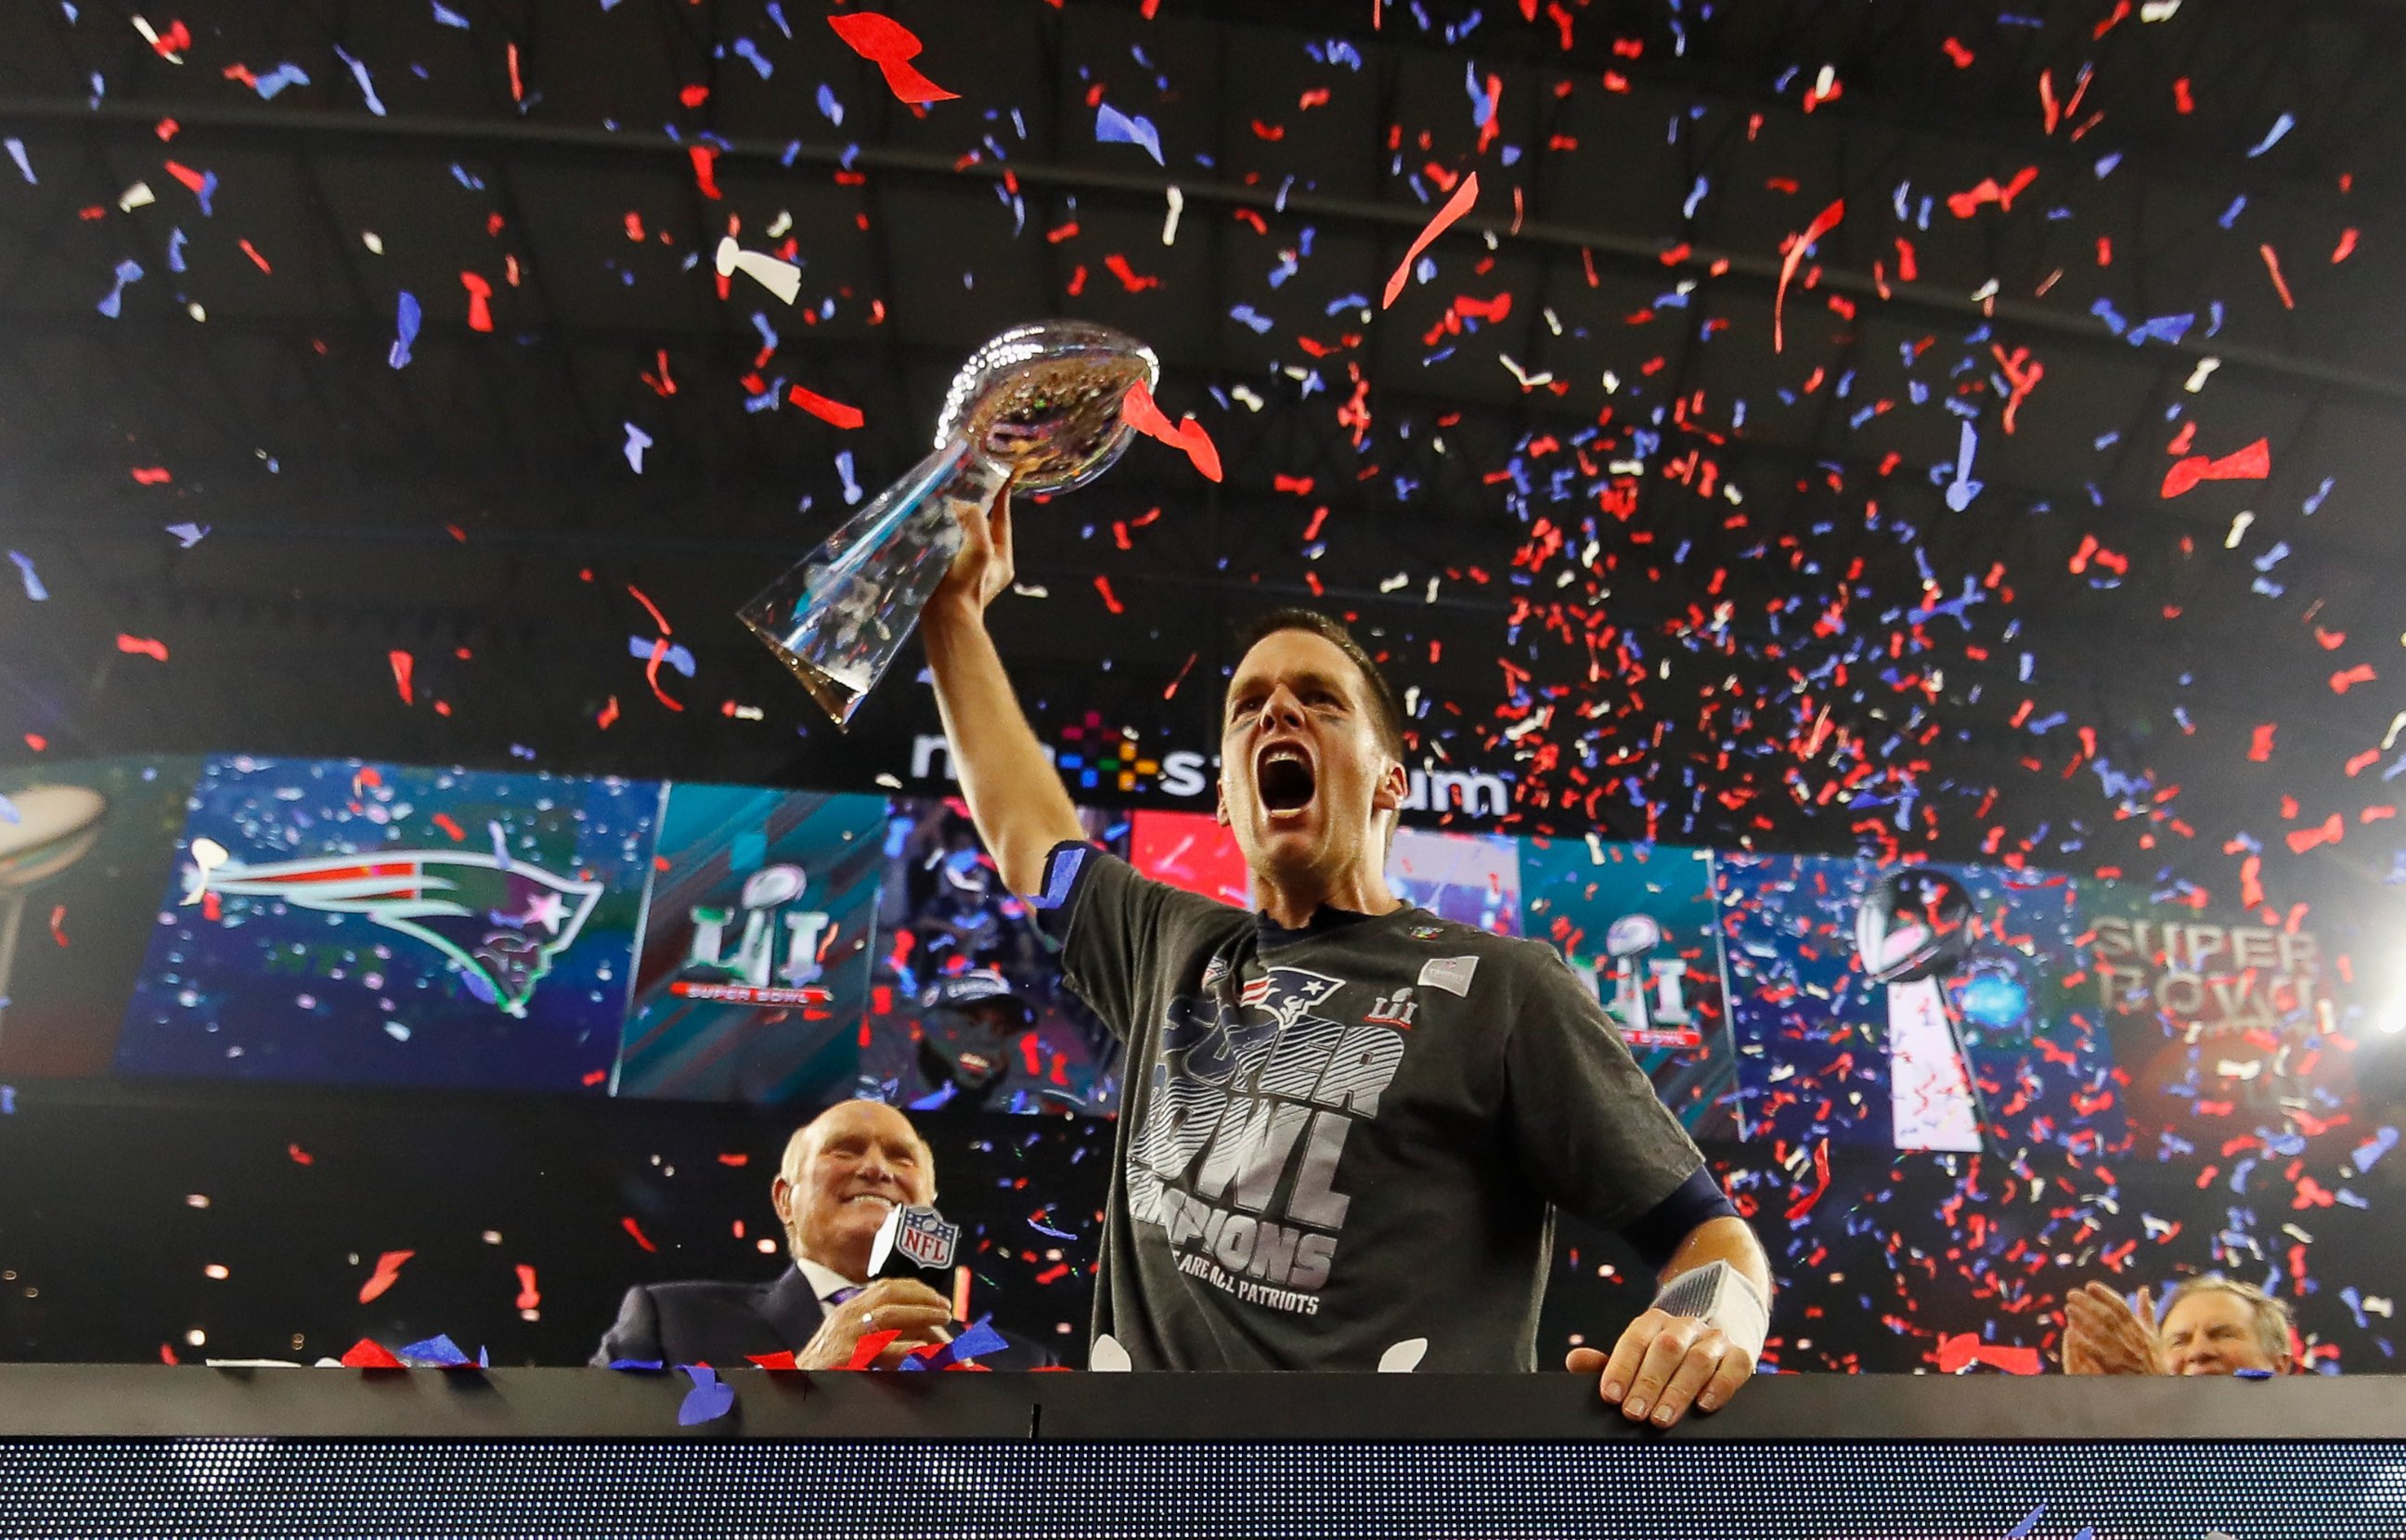 PHOTO: Quarterback Tom Brady of the New England Patriots raises the Vince Lombardi Trophy after defeating the Atlanta Falcons during Super Bowl 51,  February 5, 2017 in Houston, Texas. 